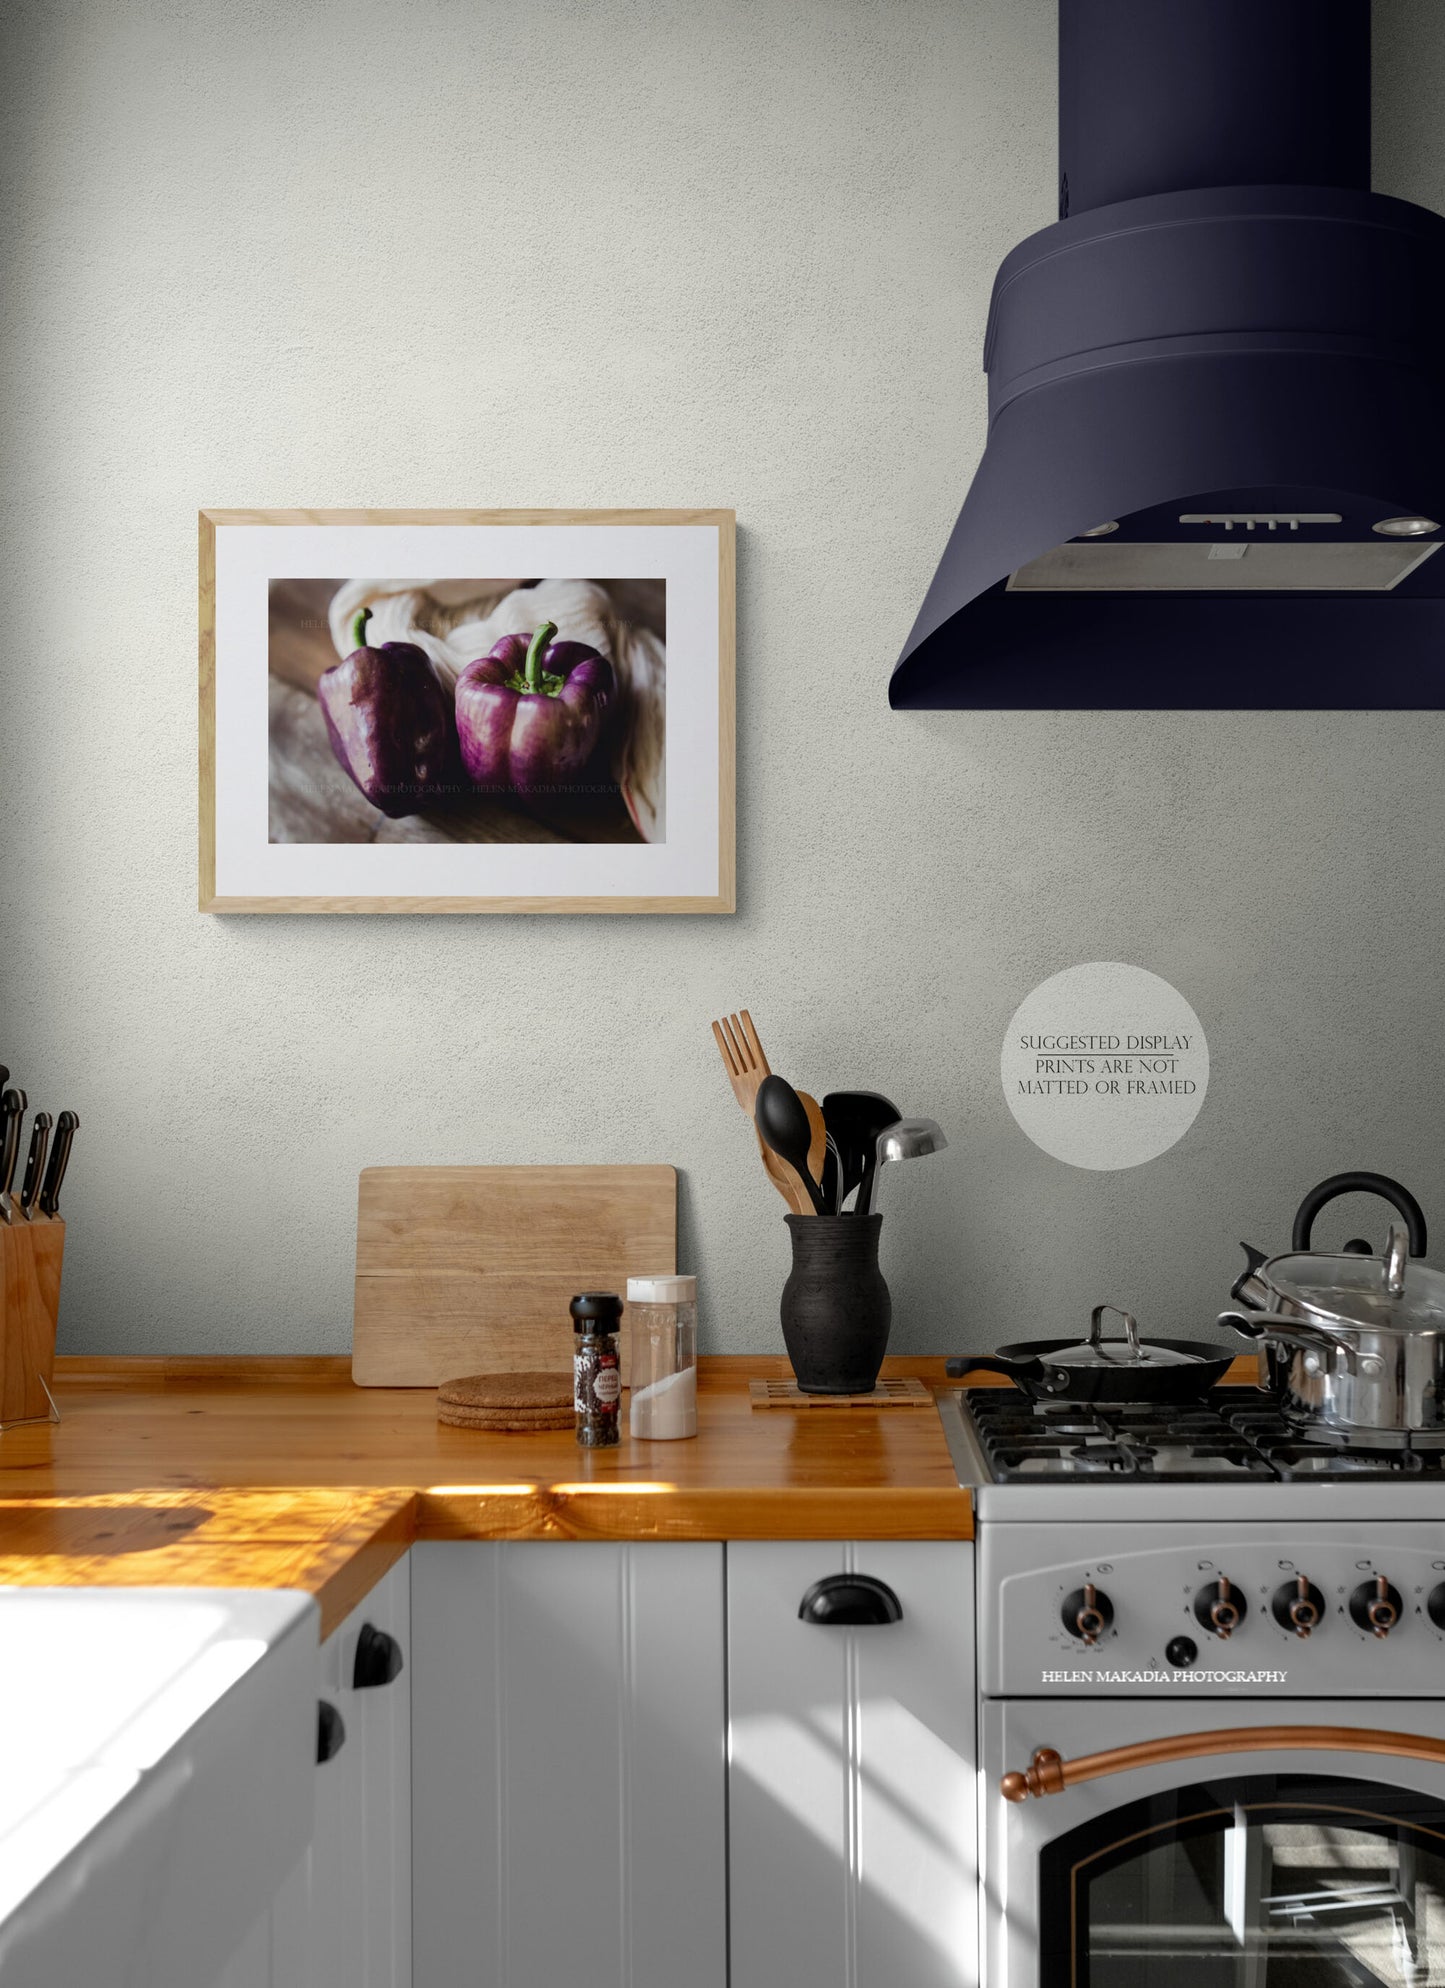 Photograph of Purple Pepper displayed as wall art in a kitchen